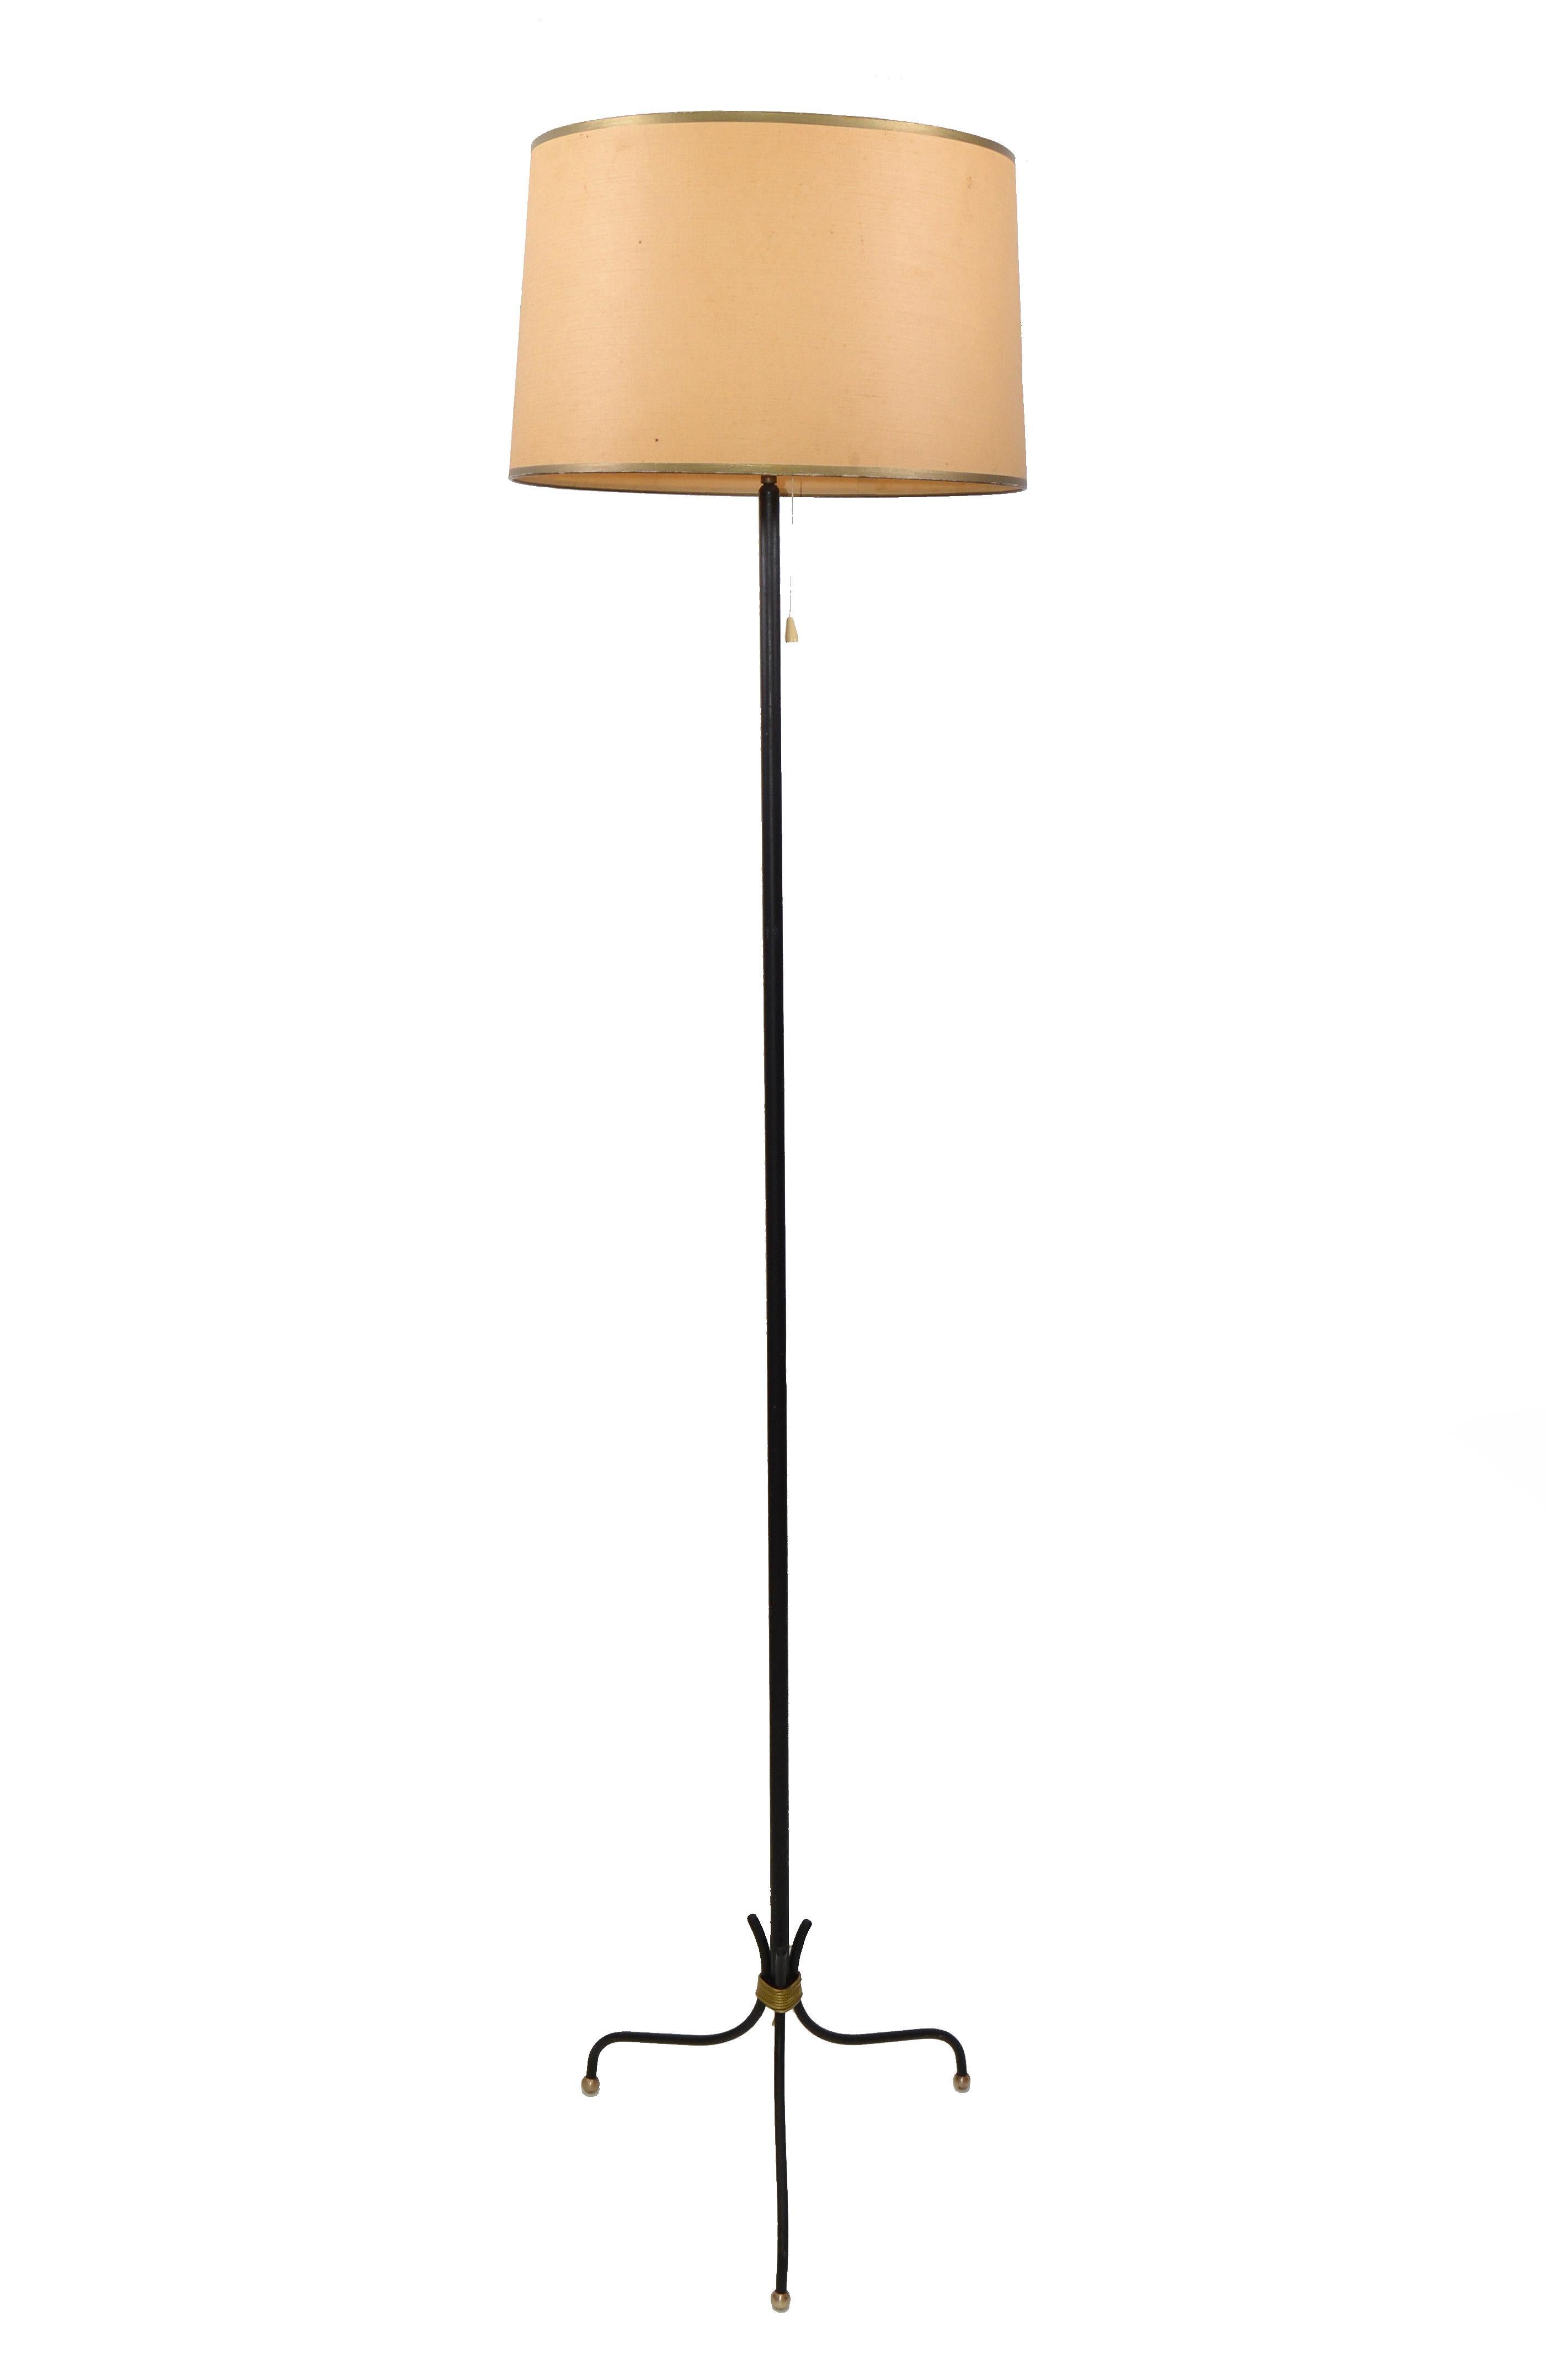 Pierre Guariche Style French Mid-Century Modern Wrought Iron & Brass Floor Lamp 5